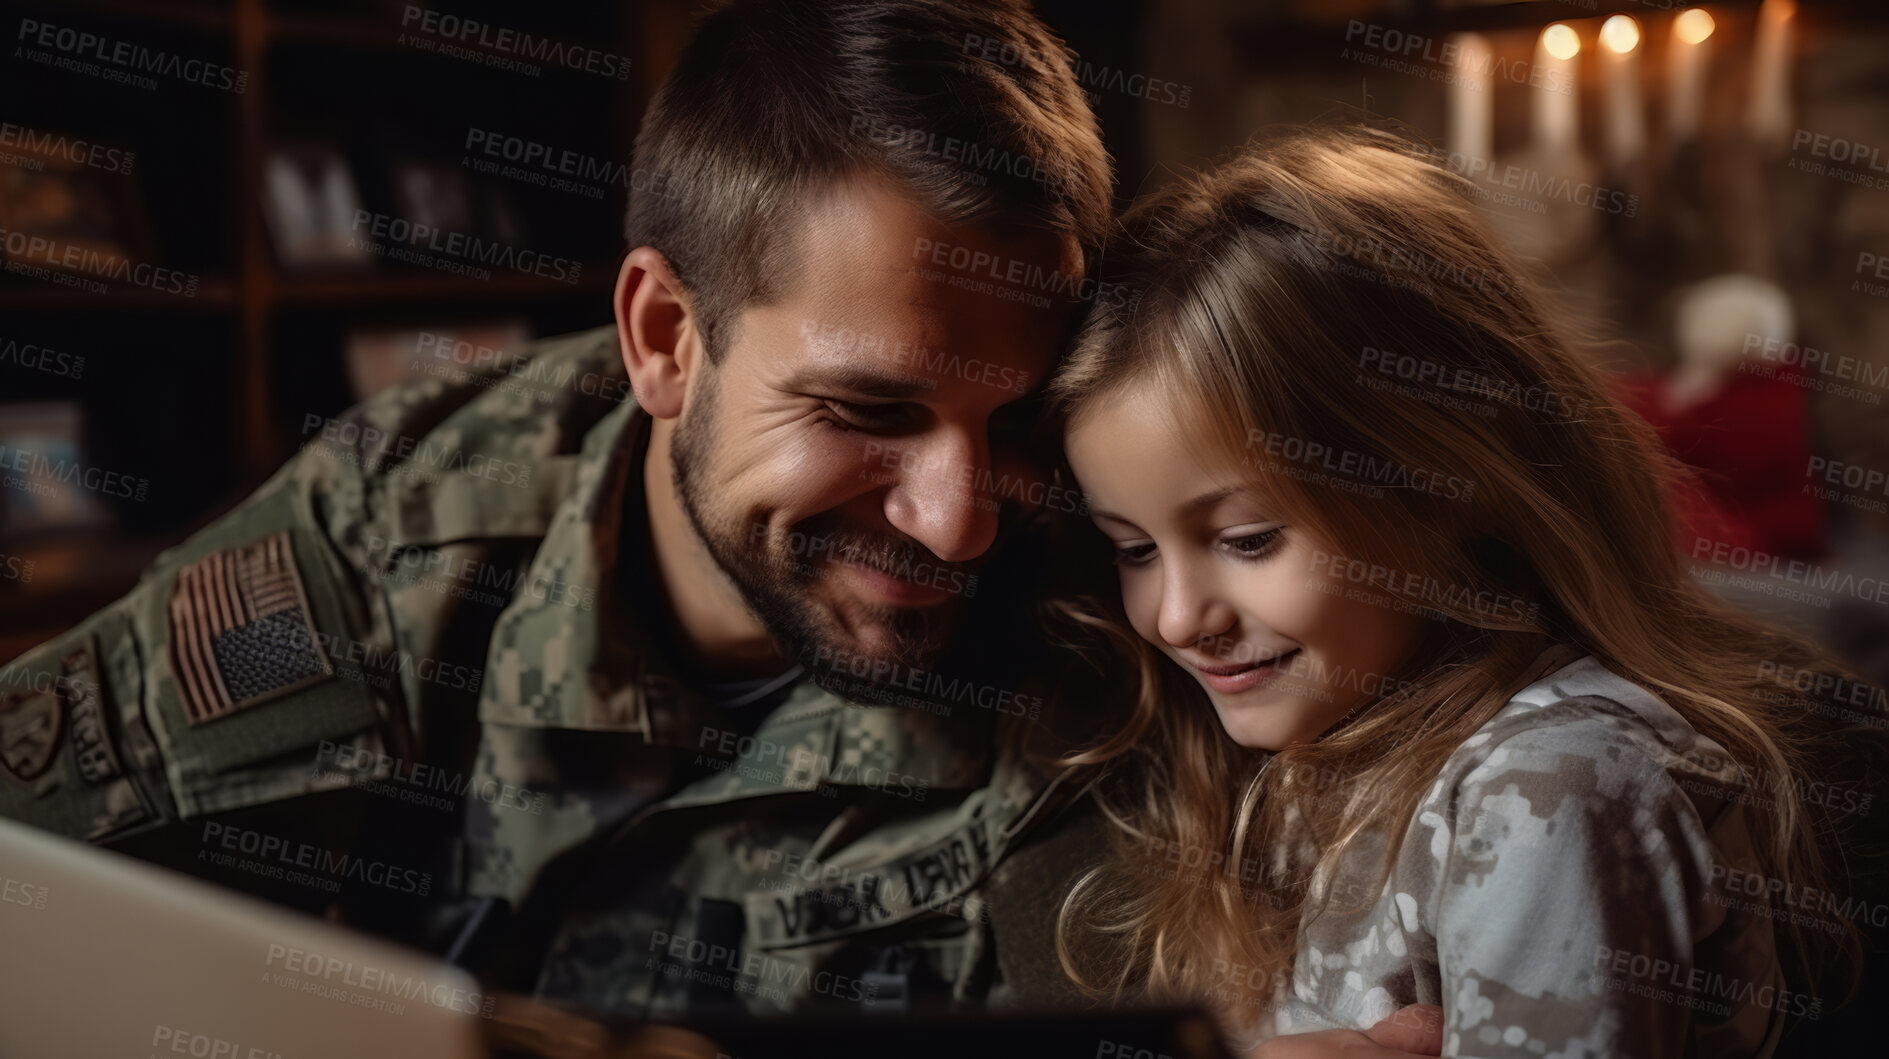 Buy stock photo Close-up portrait of soldier with child at table in home. Veteran homecoming concept.